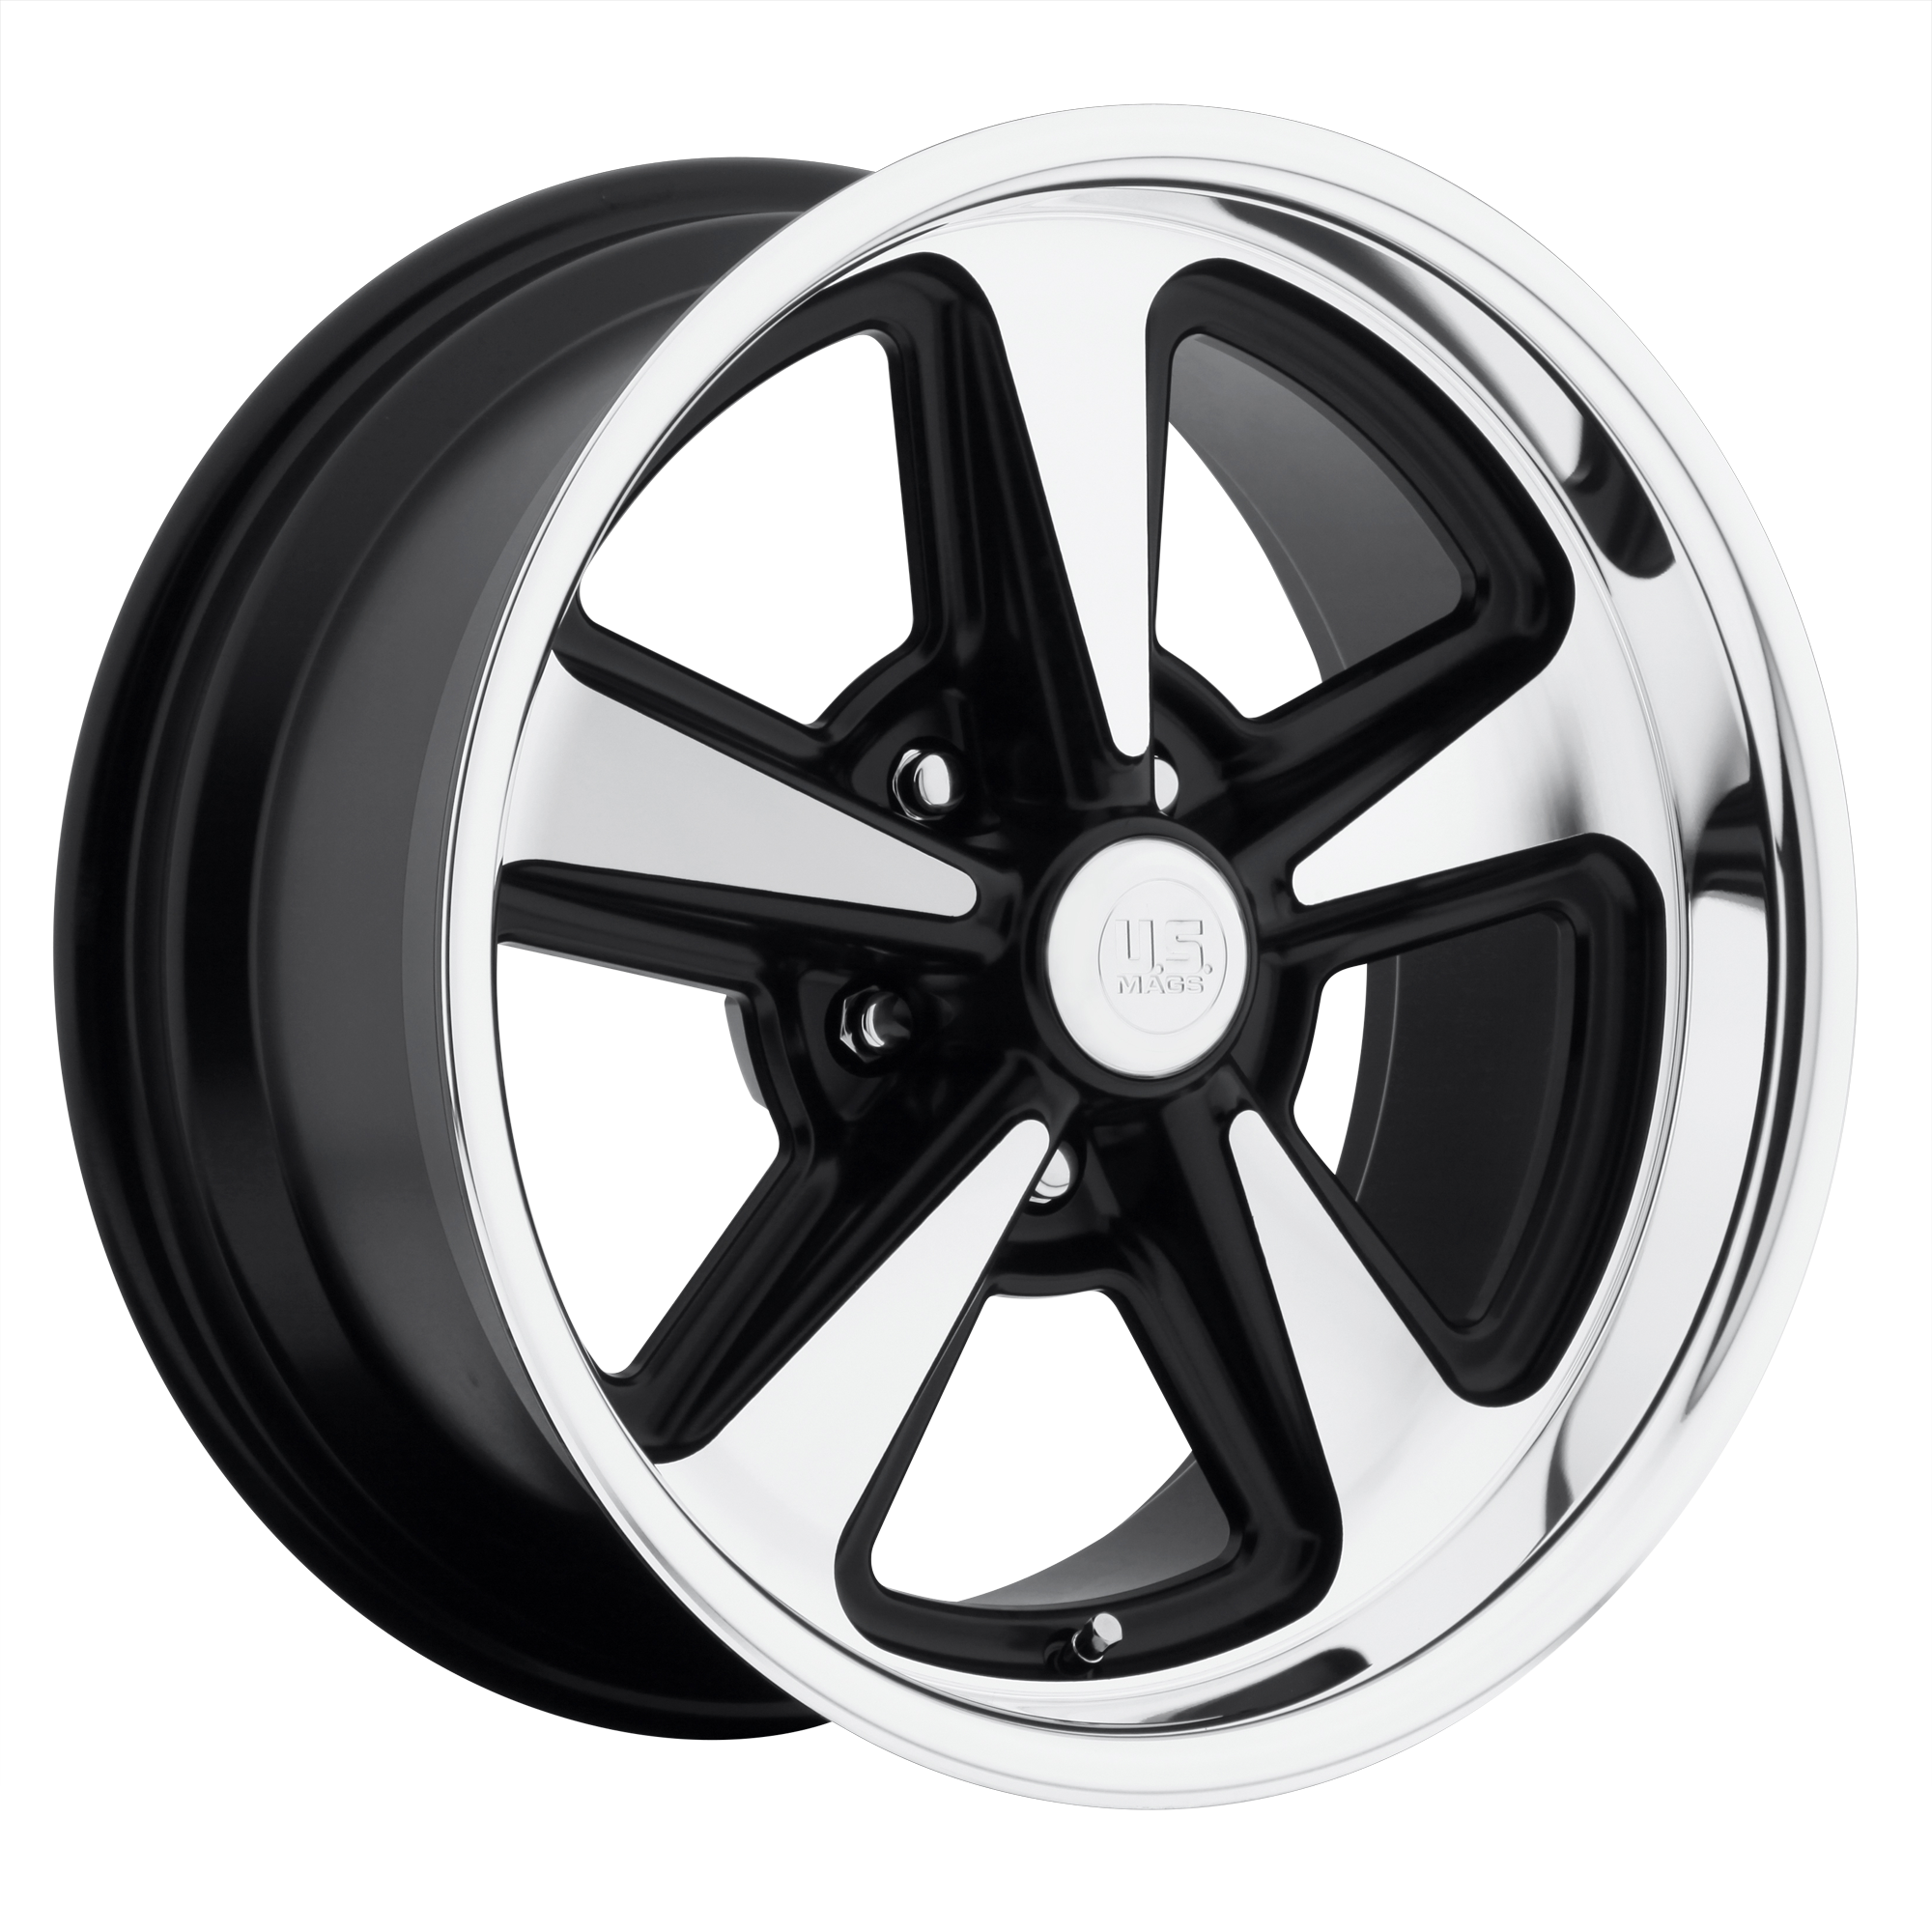 BANDIT 18x8 5x120.65 MATTE BLACK MACHINED (1 mm) - Tires and Engine Performance